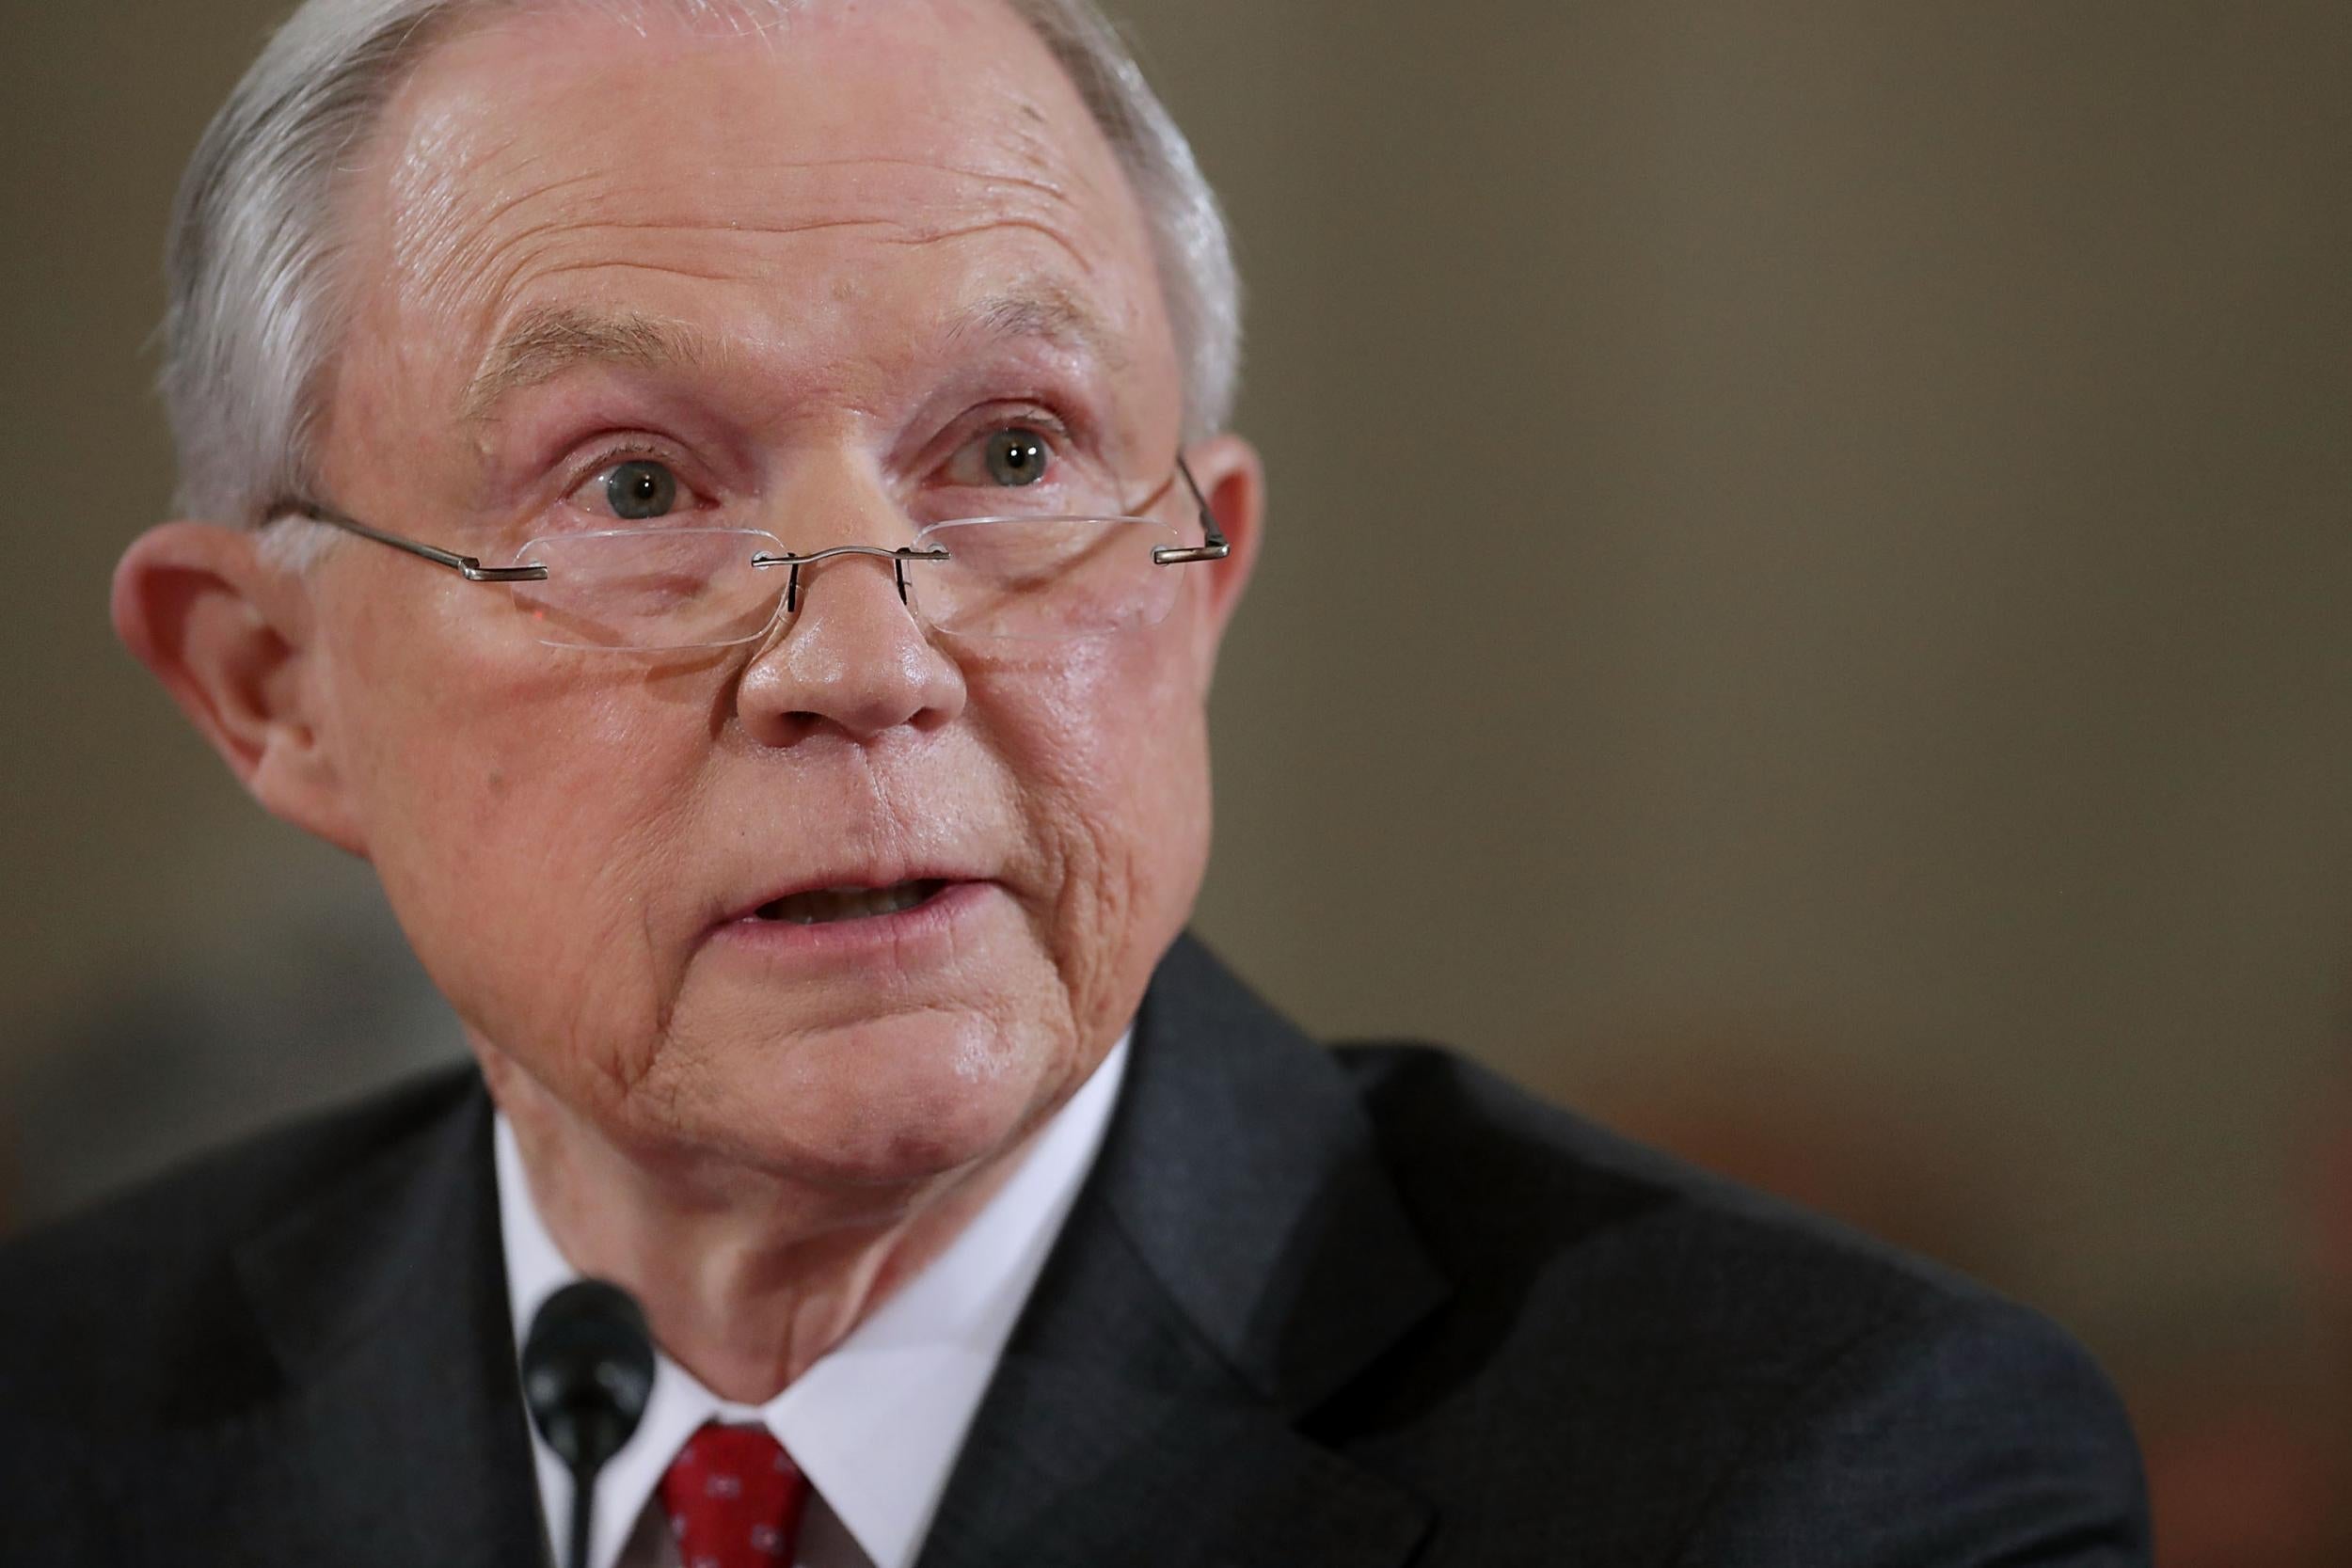 Jeff Sessions came under fire for denying he had contact with Russian officials during his Senate confirmation hearing